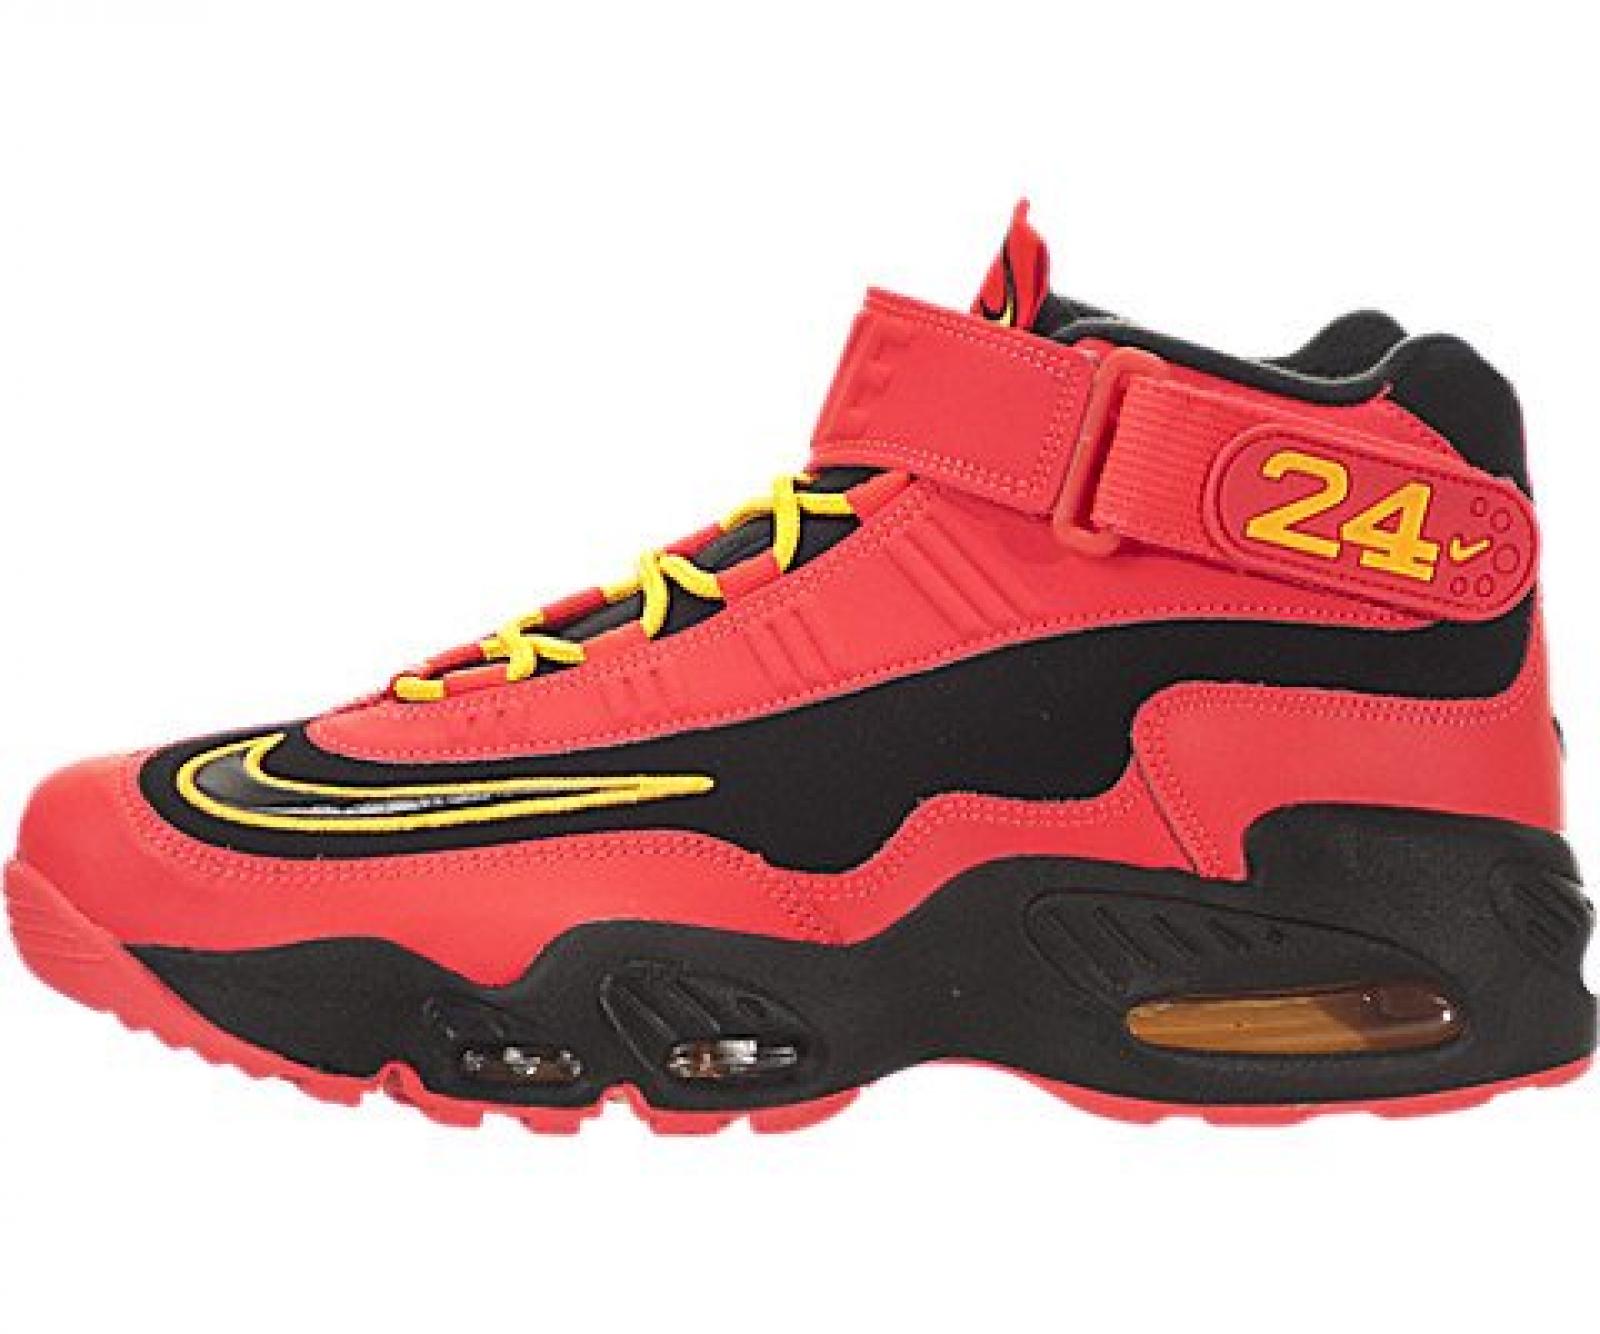 Nike Air Griffey Max 1 Black Red Mens Trainers Size 43 EU 